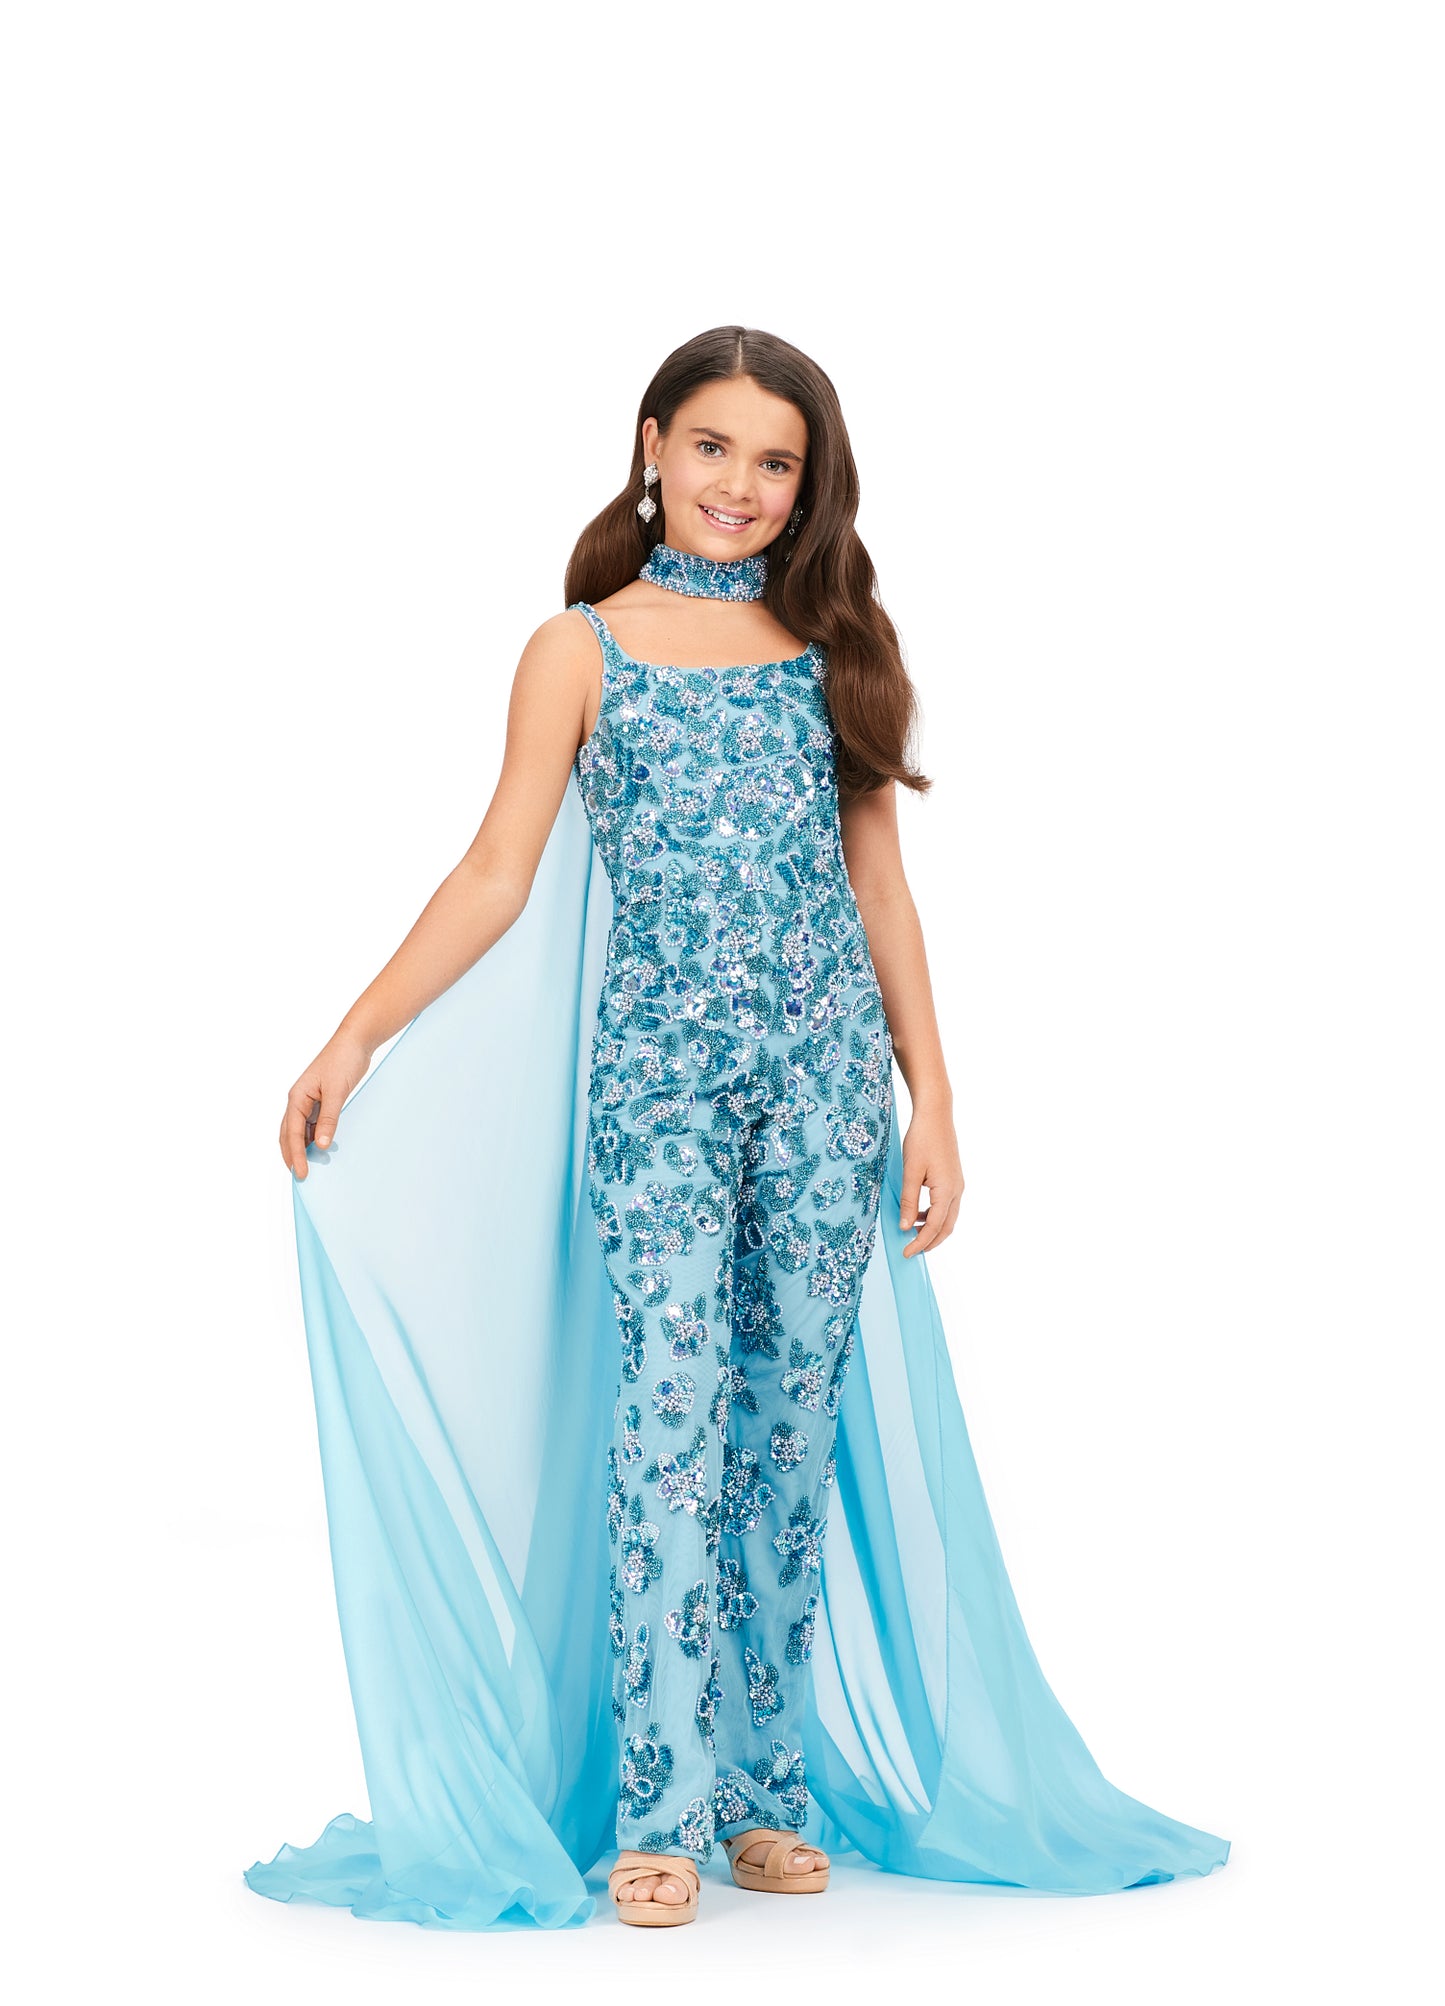 Ashley Lauren Kids 8190 Fully Beaded With Beaded Choker And Chiffon Cape Jumpsuit. A jumpsuit for a queen! This fully beaded number features a matching choker with an attached cape. This screams fabulous!